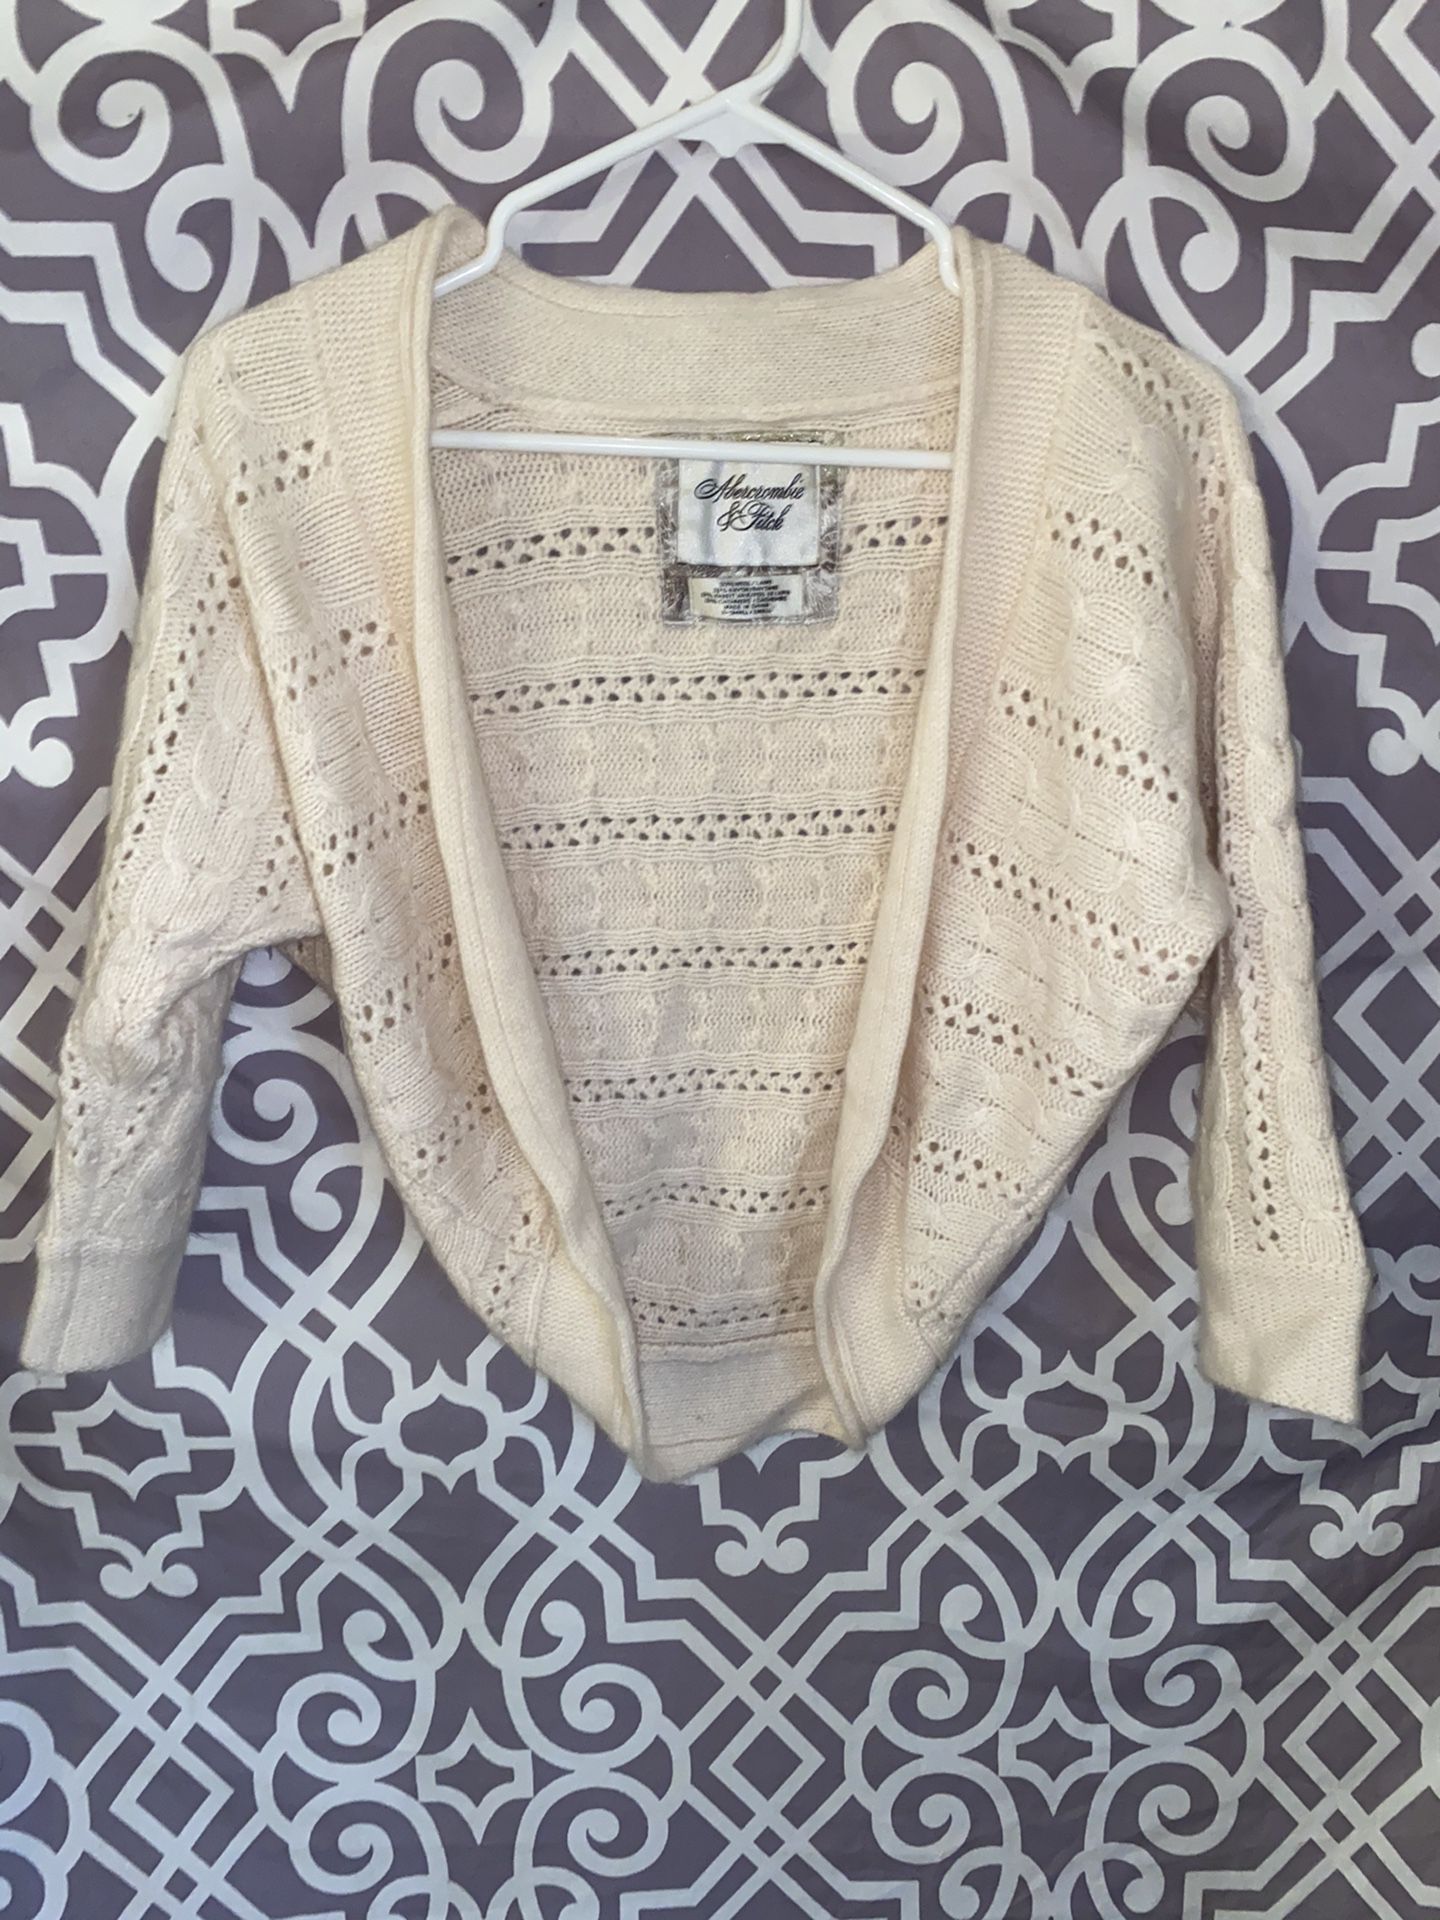 XS Knit Abercrombie & Fitch Cardigan Sweater Dress Cover Spring Kawaii